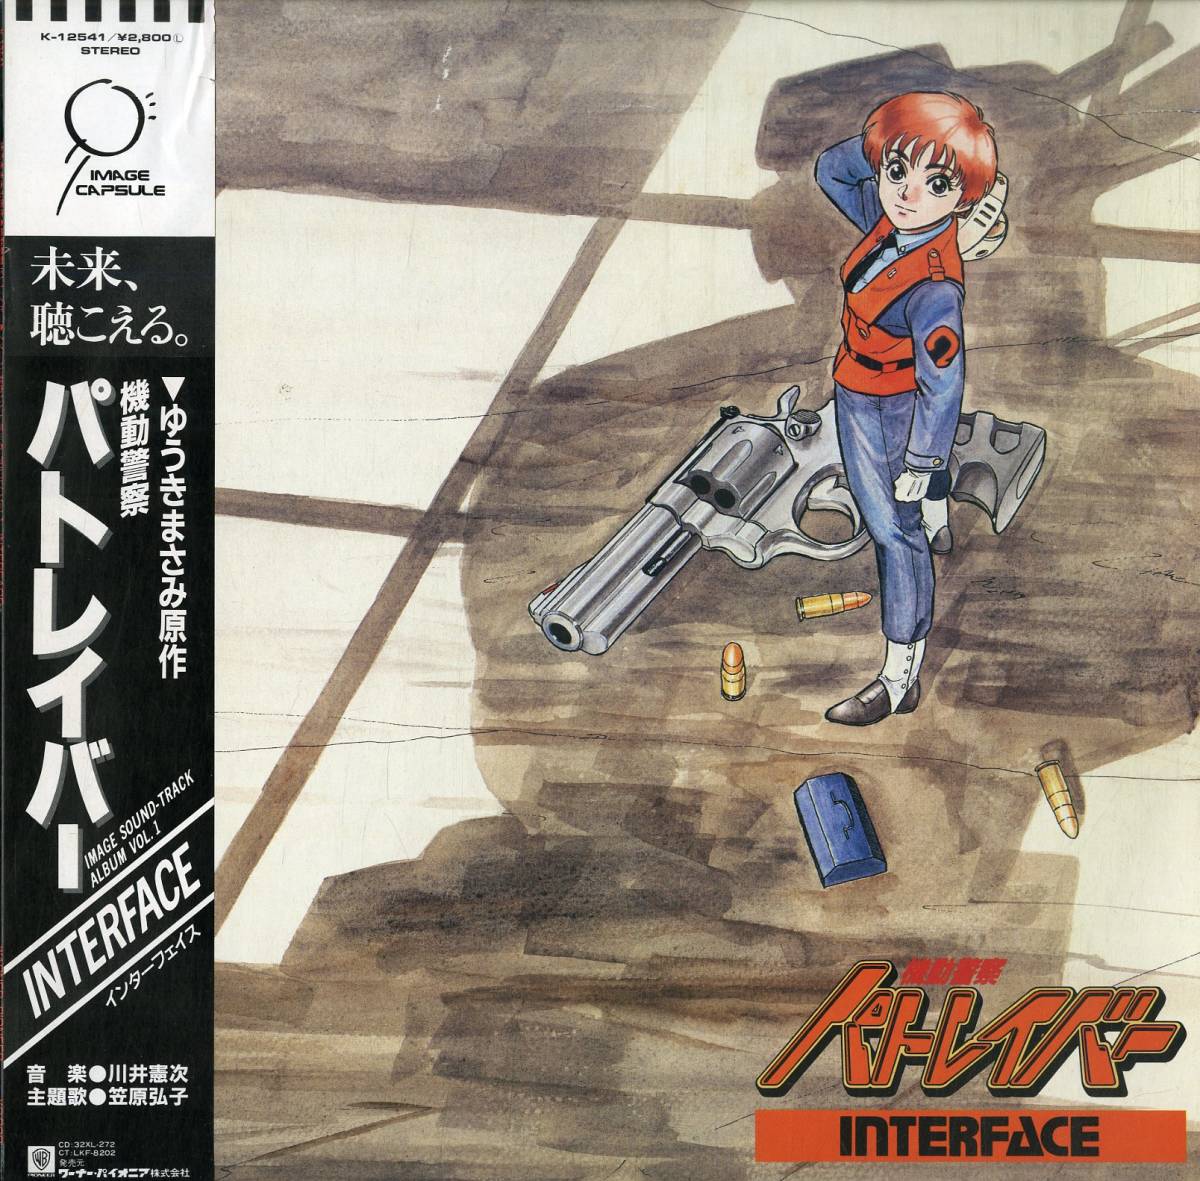 A00520662/LP/ river .. next * rice field middle . flat ( music ) / Kasahara Hiroko *...-.(.)[ Mobile Police Patlabor Mobile Police Patlabor OST Image Sound-tr